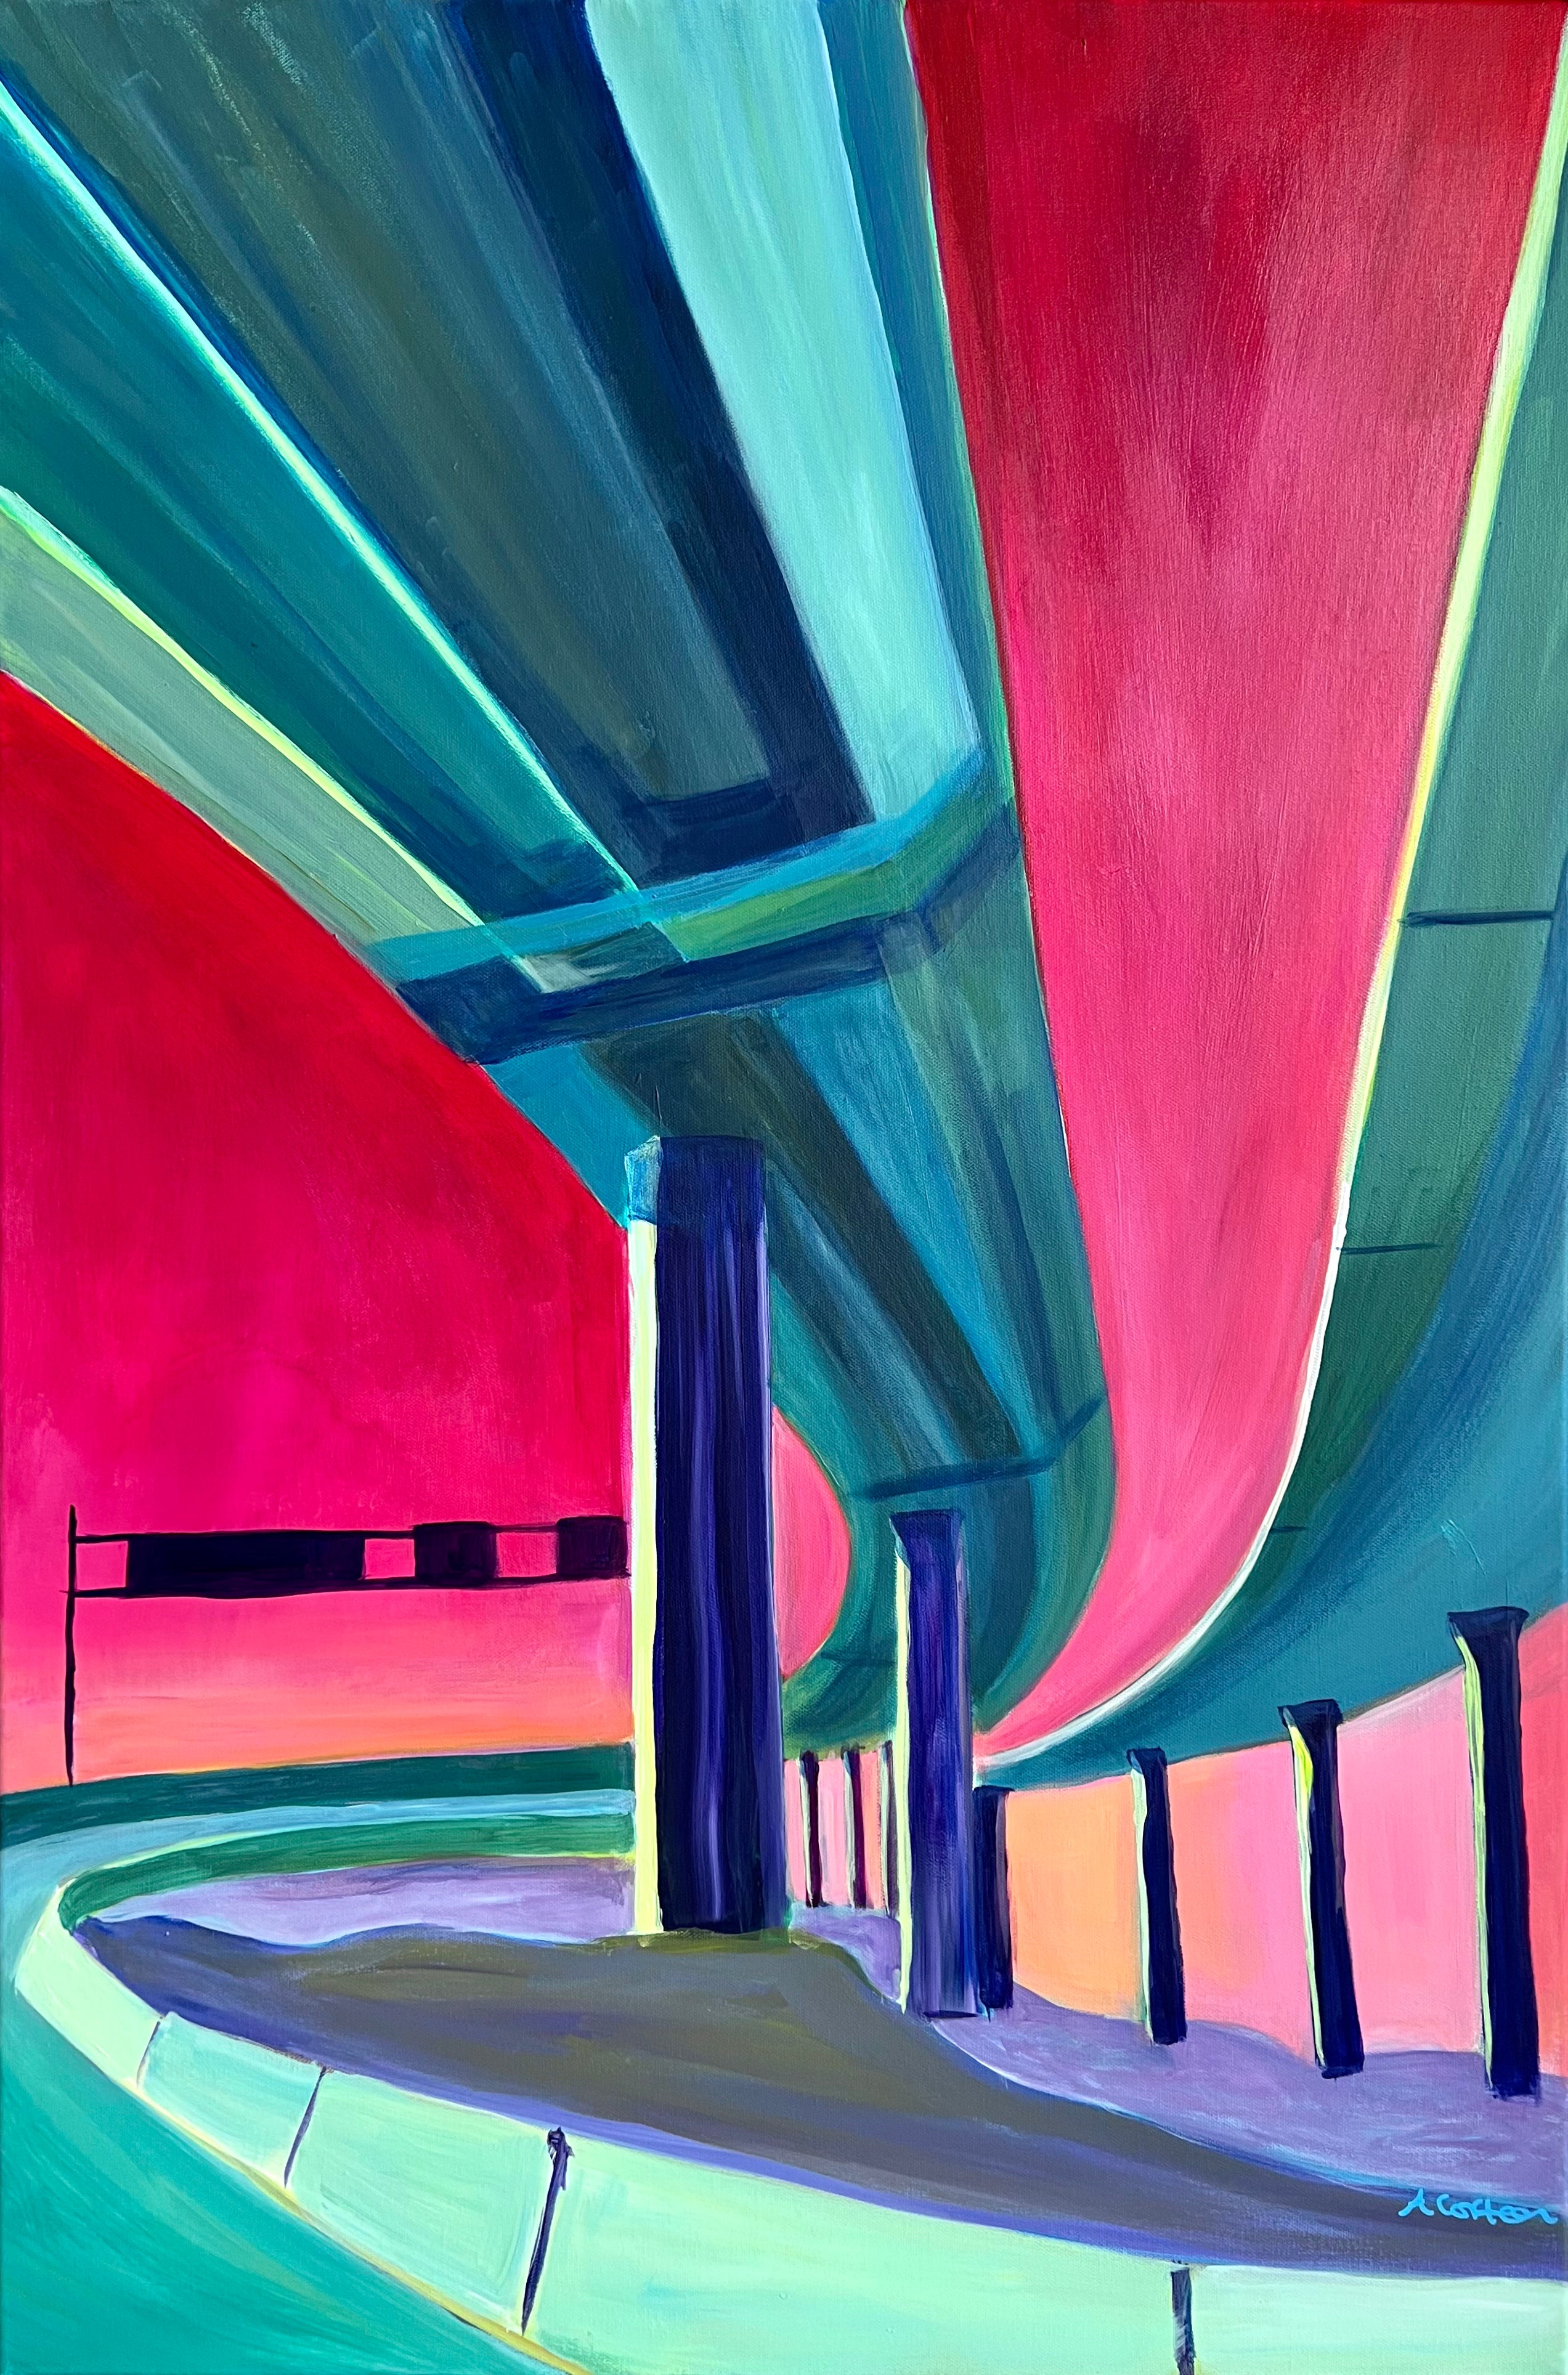 Road to Nowhere 36 x 24